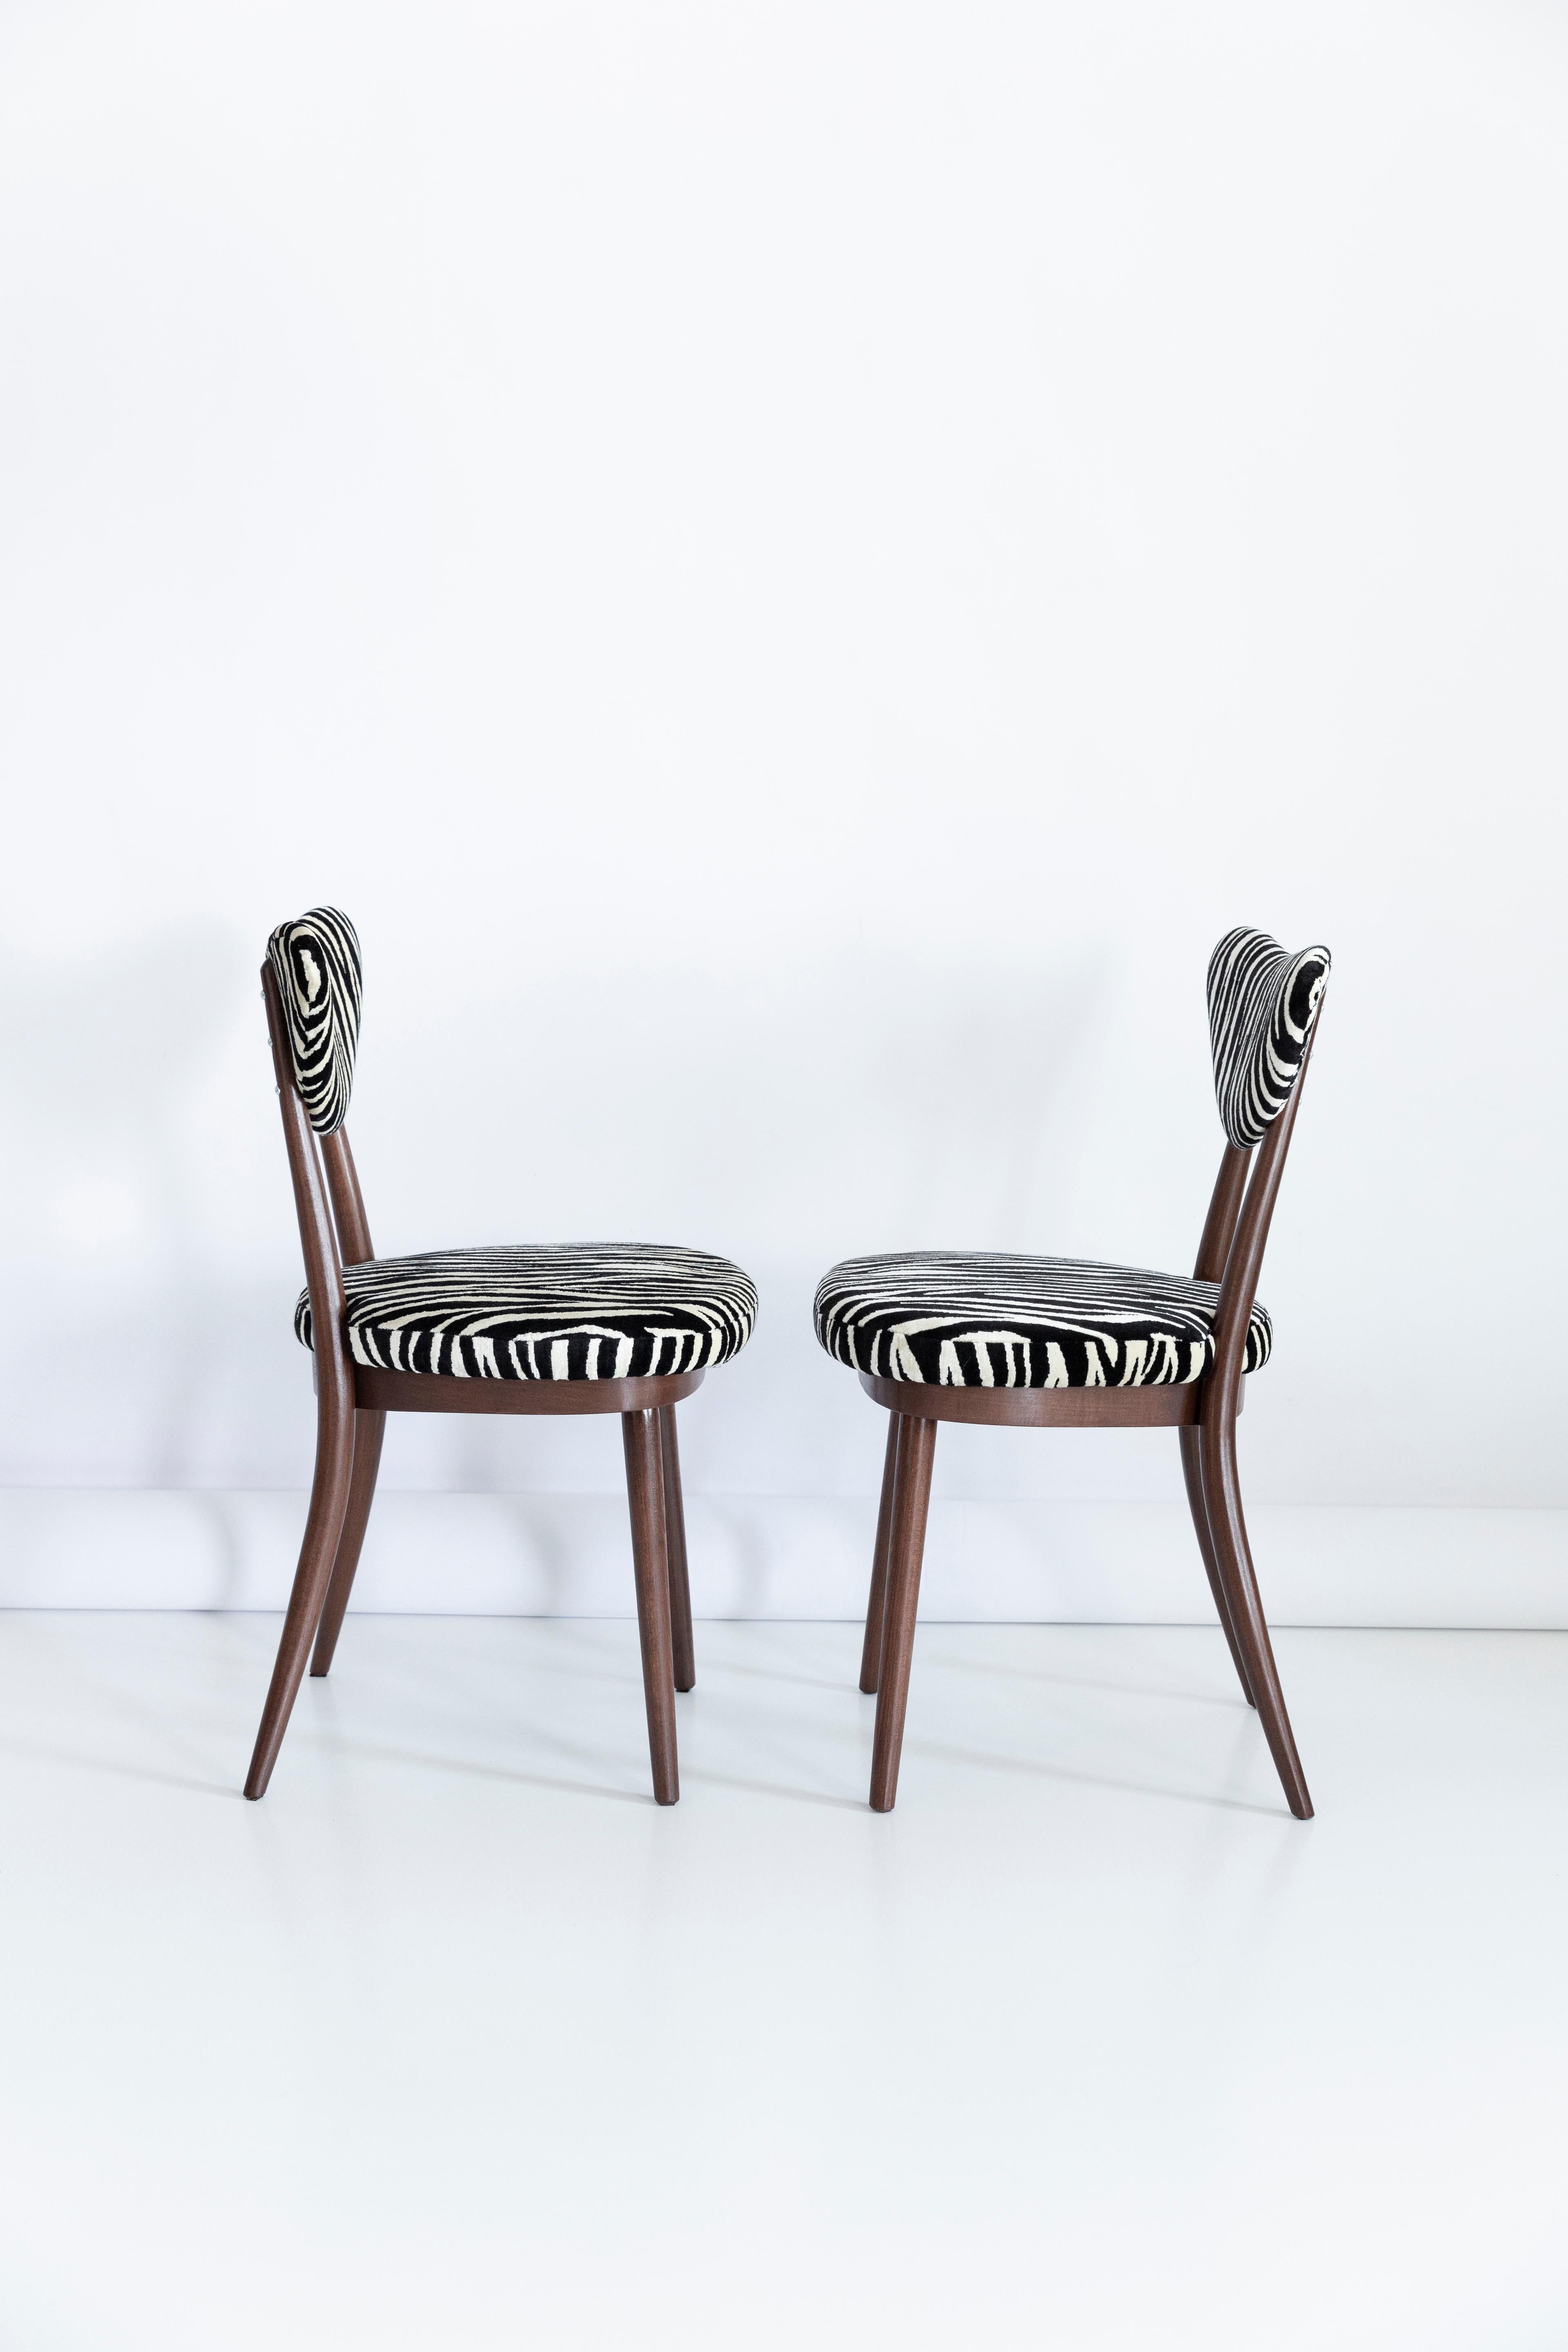 20th Century Set of Six Midcentury Zebra Black and White Heart Chairs, Poland, 1960s For Sale